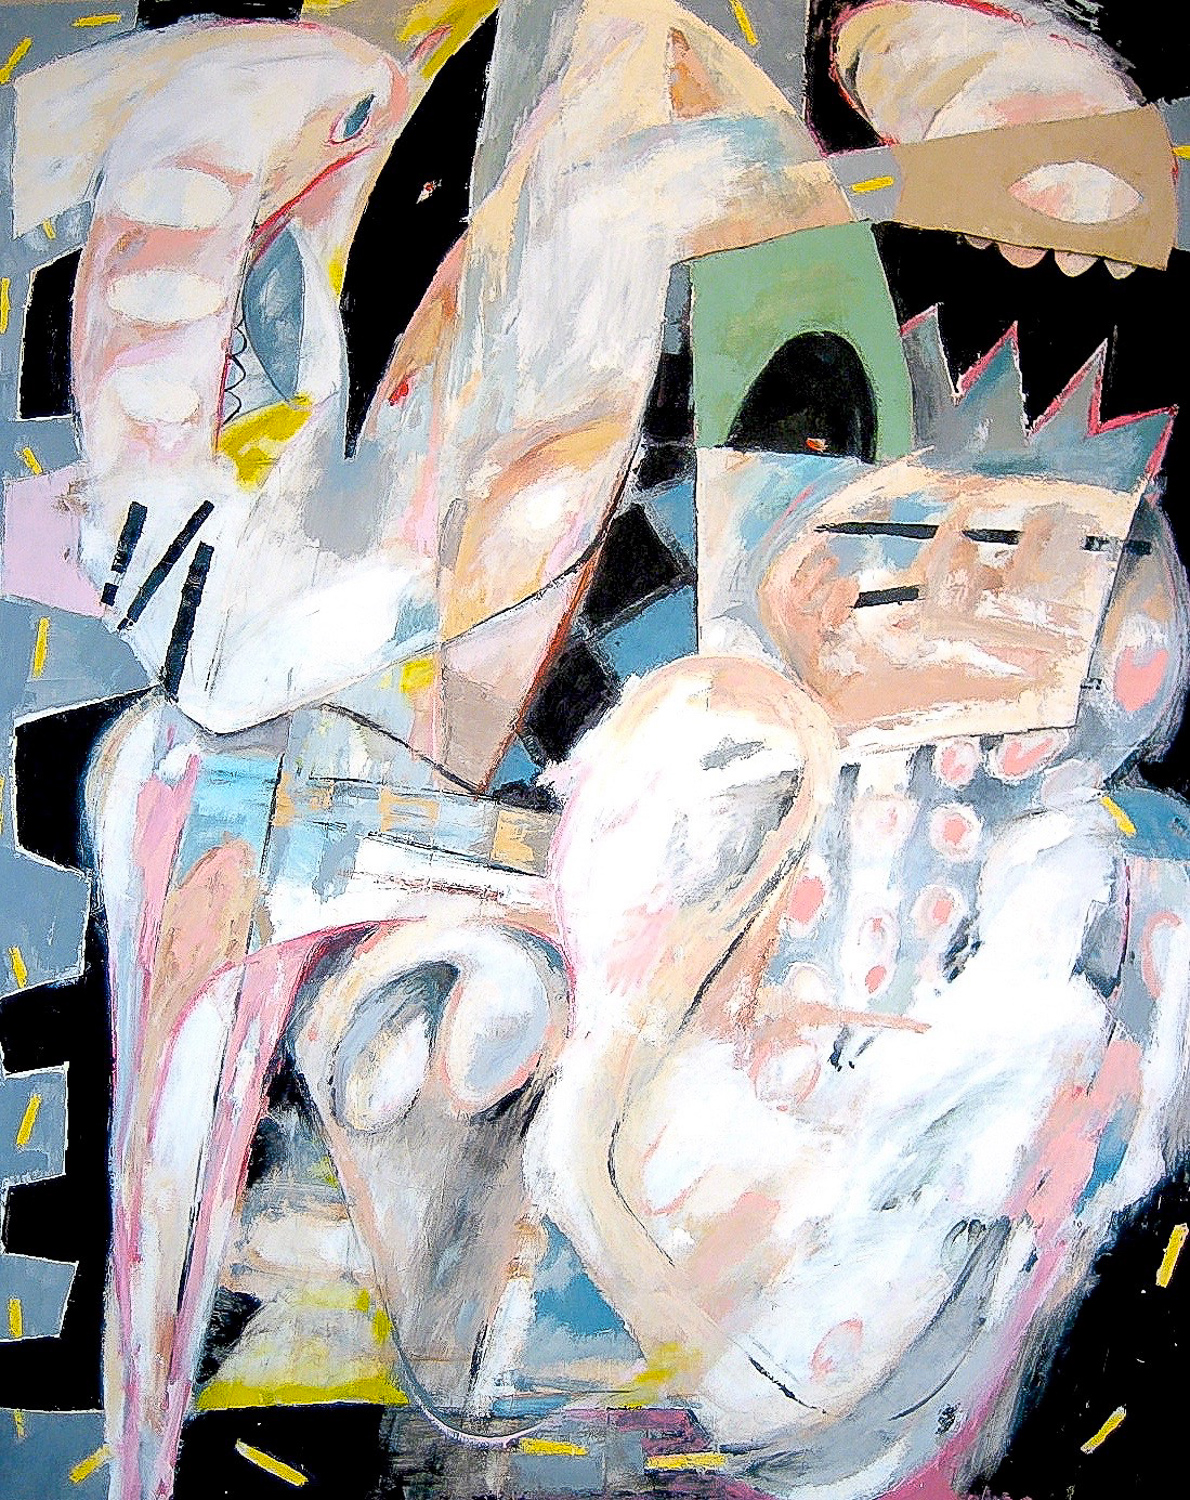   Perverse, Impotent, or Blind?&nbsp; , 2007 Oil on canvas 92 x 74" 